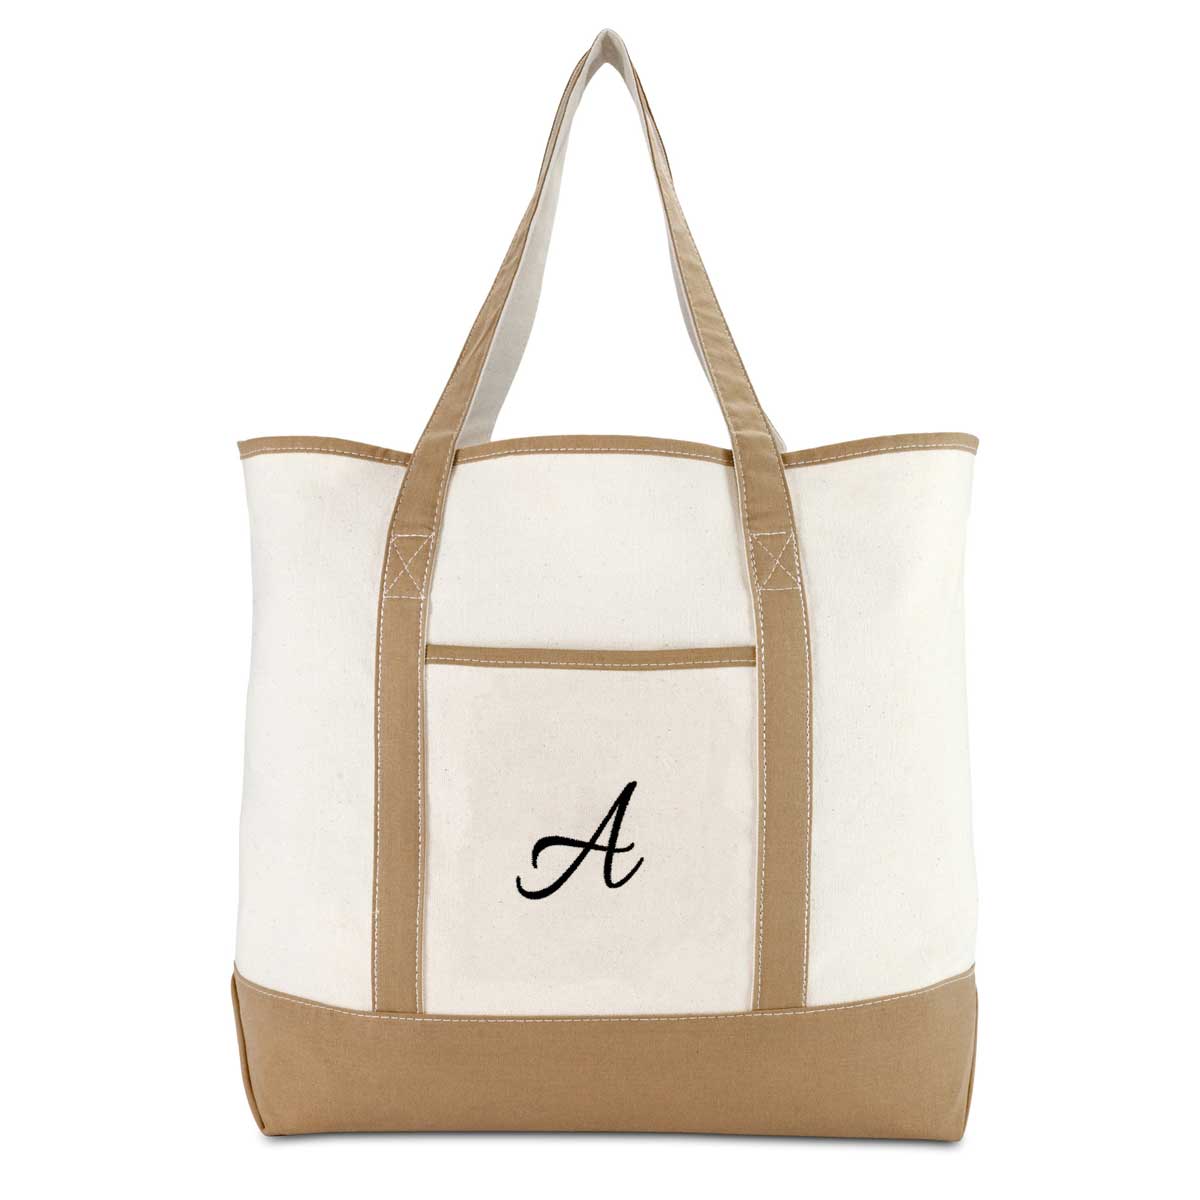 Personalized Tote Bag for Women